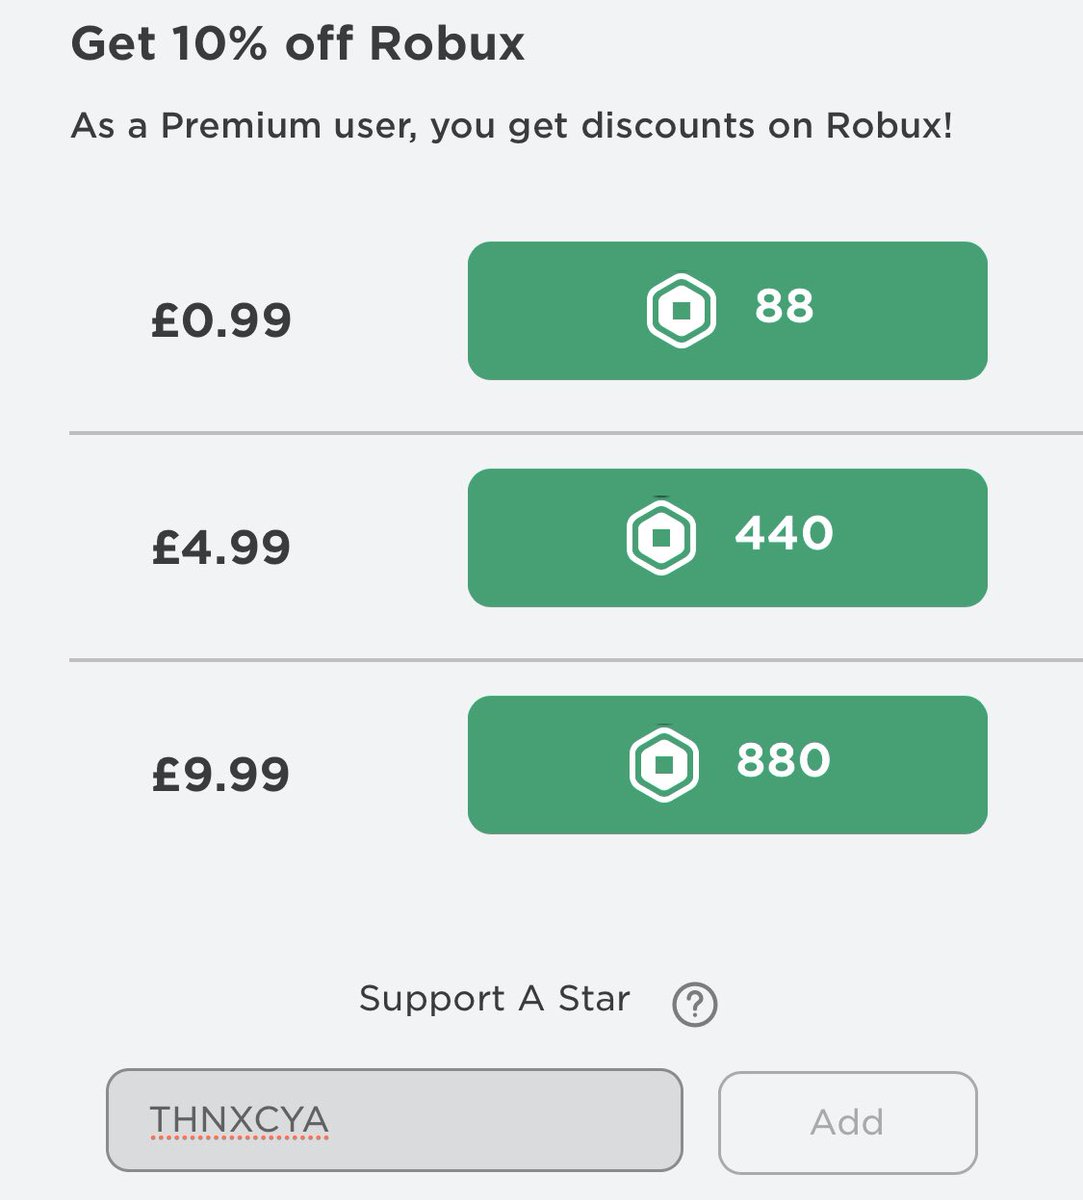 Thnxcya On Twitter Roblox Added Star Codes To Mobile App Hugeee Thanks To Everyone Who Is Using My Code Thnxcya On Pc And Now On Mobile It Helps Support The Channel